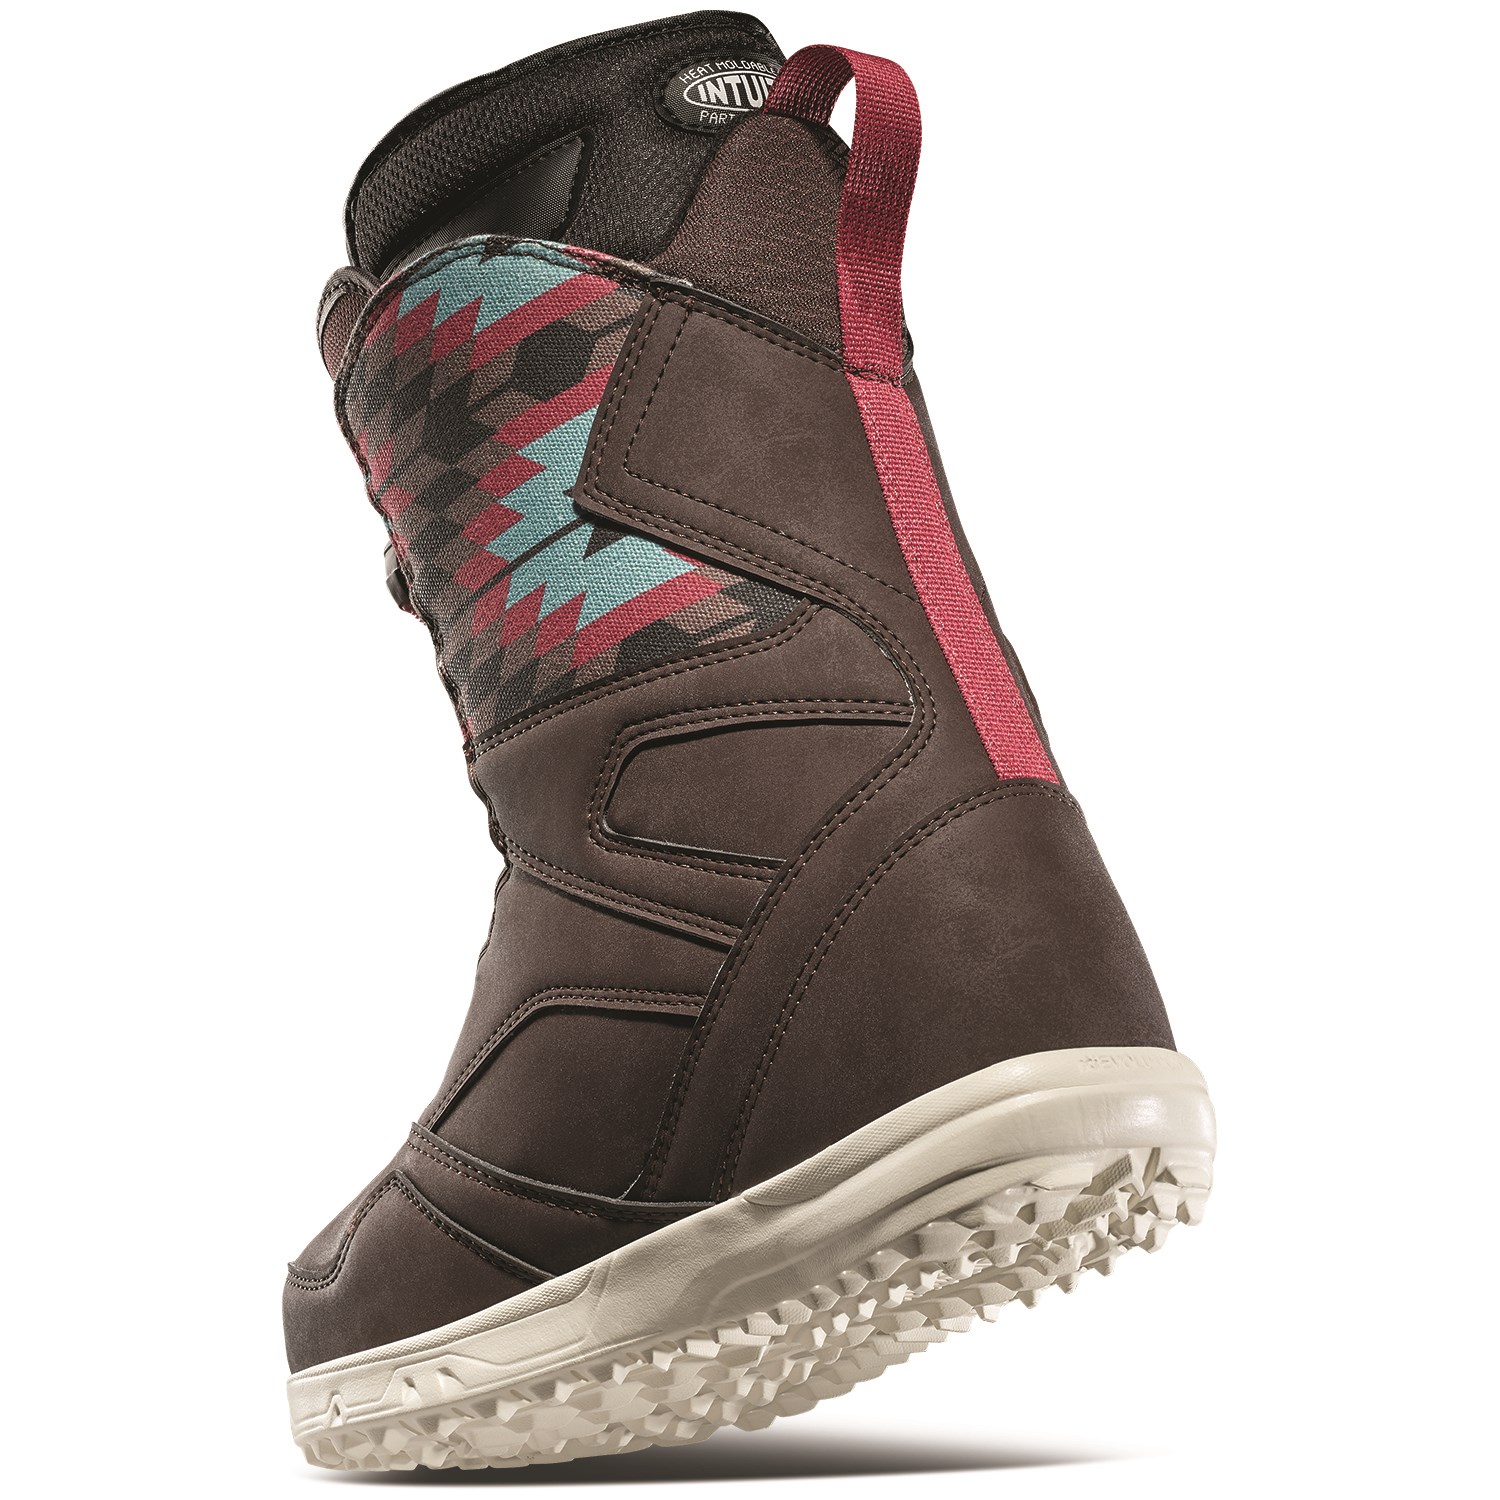 Thirty Two STW Double BOA Womens Snowboard Boots 